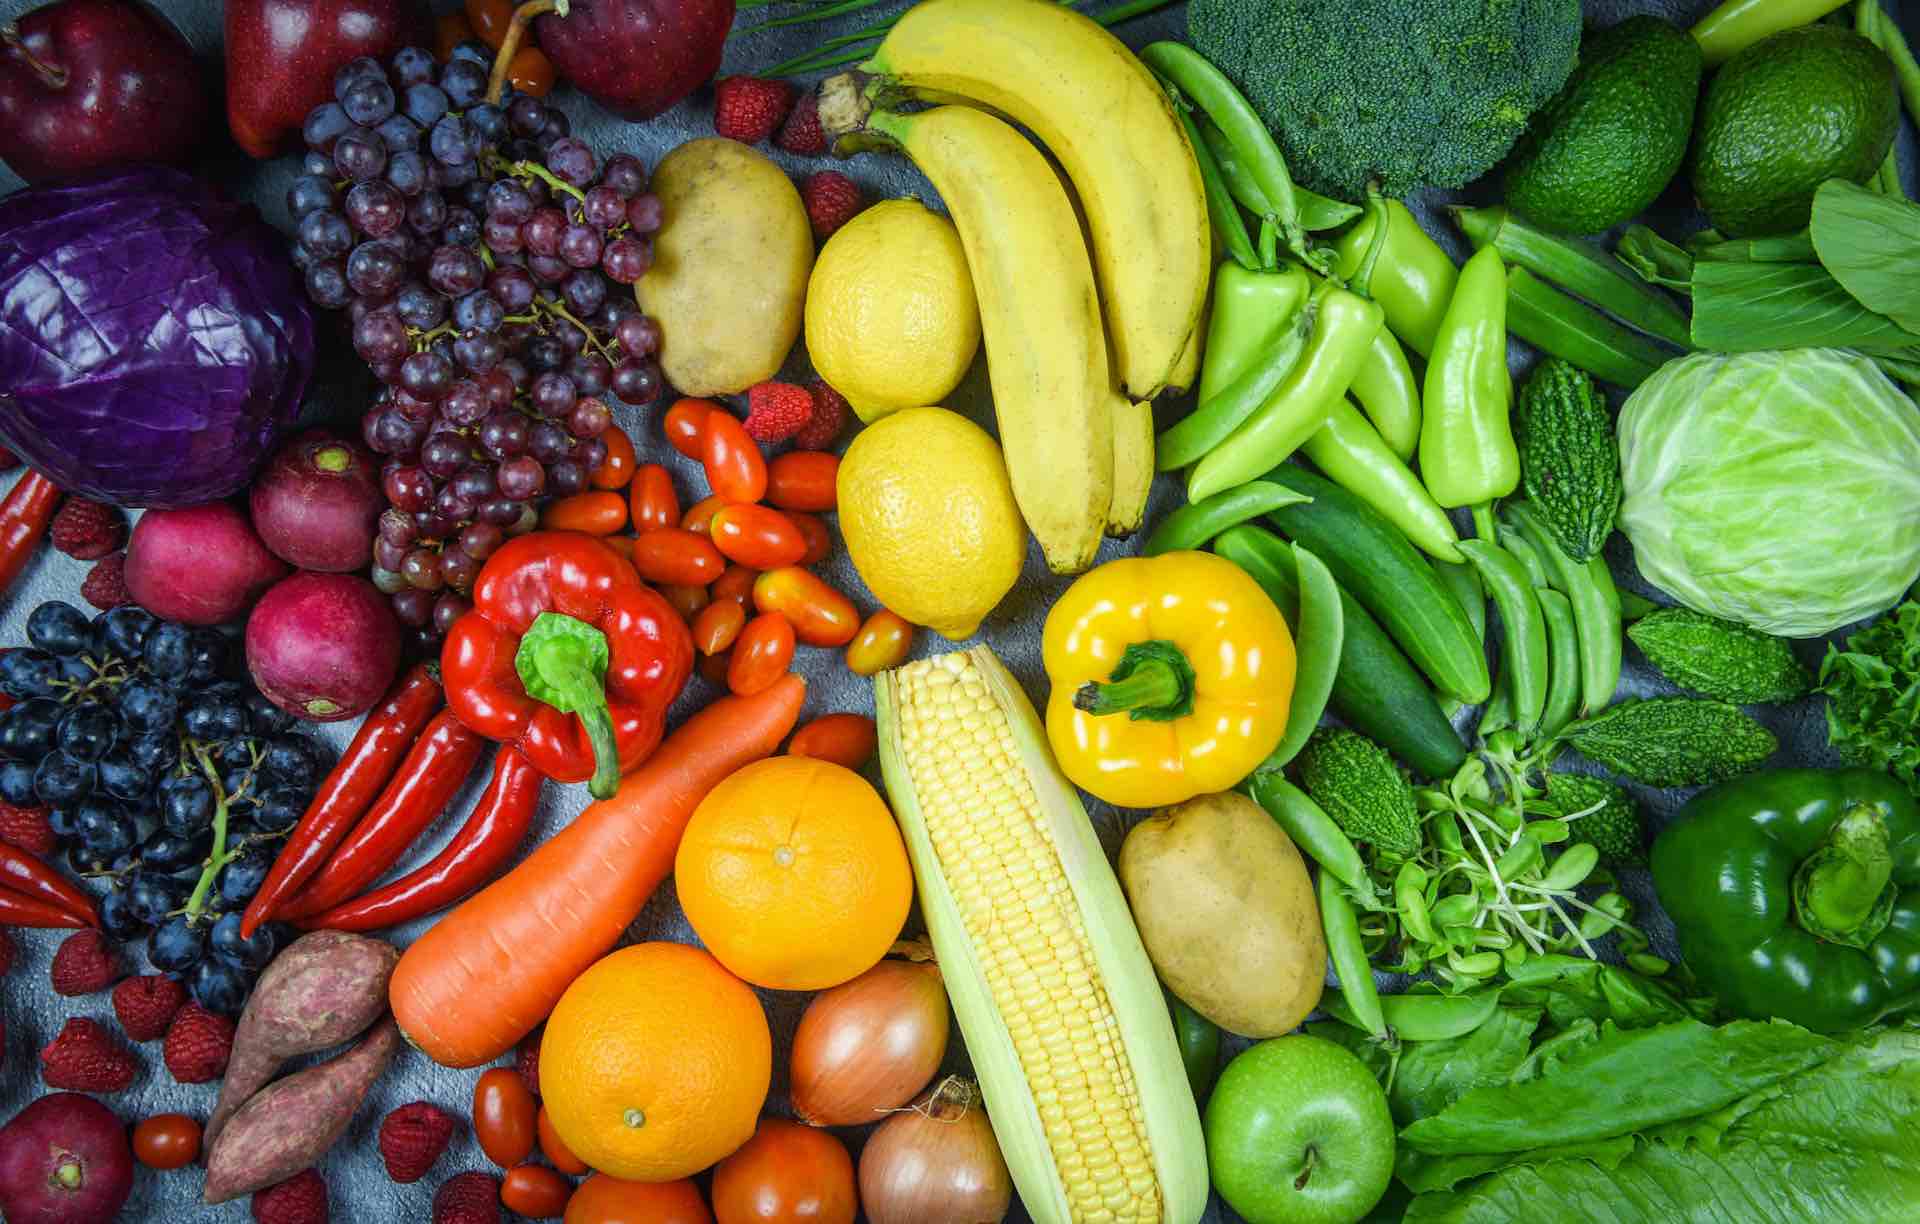 Vegetables and fruits reduce death risk nearly 10 percent - Japanese scientists